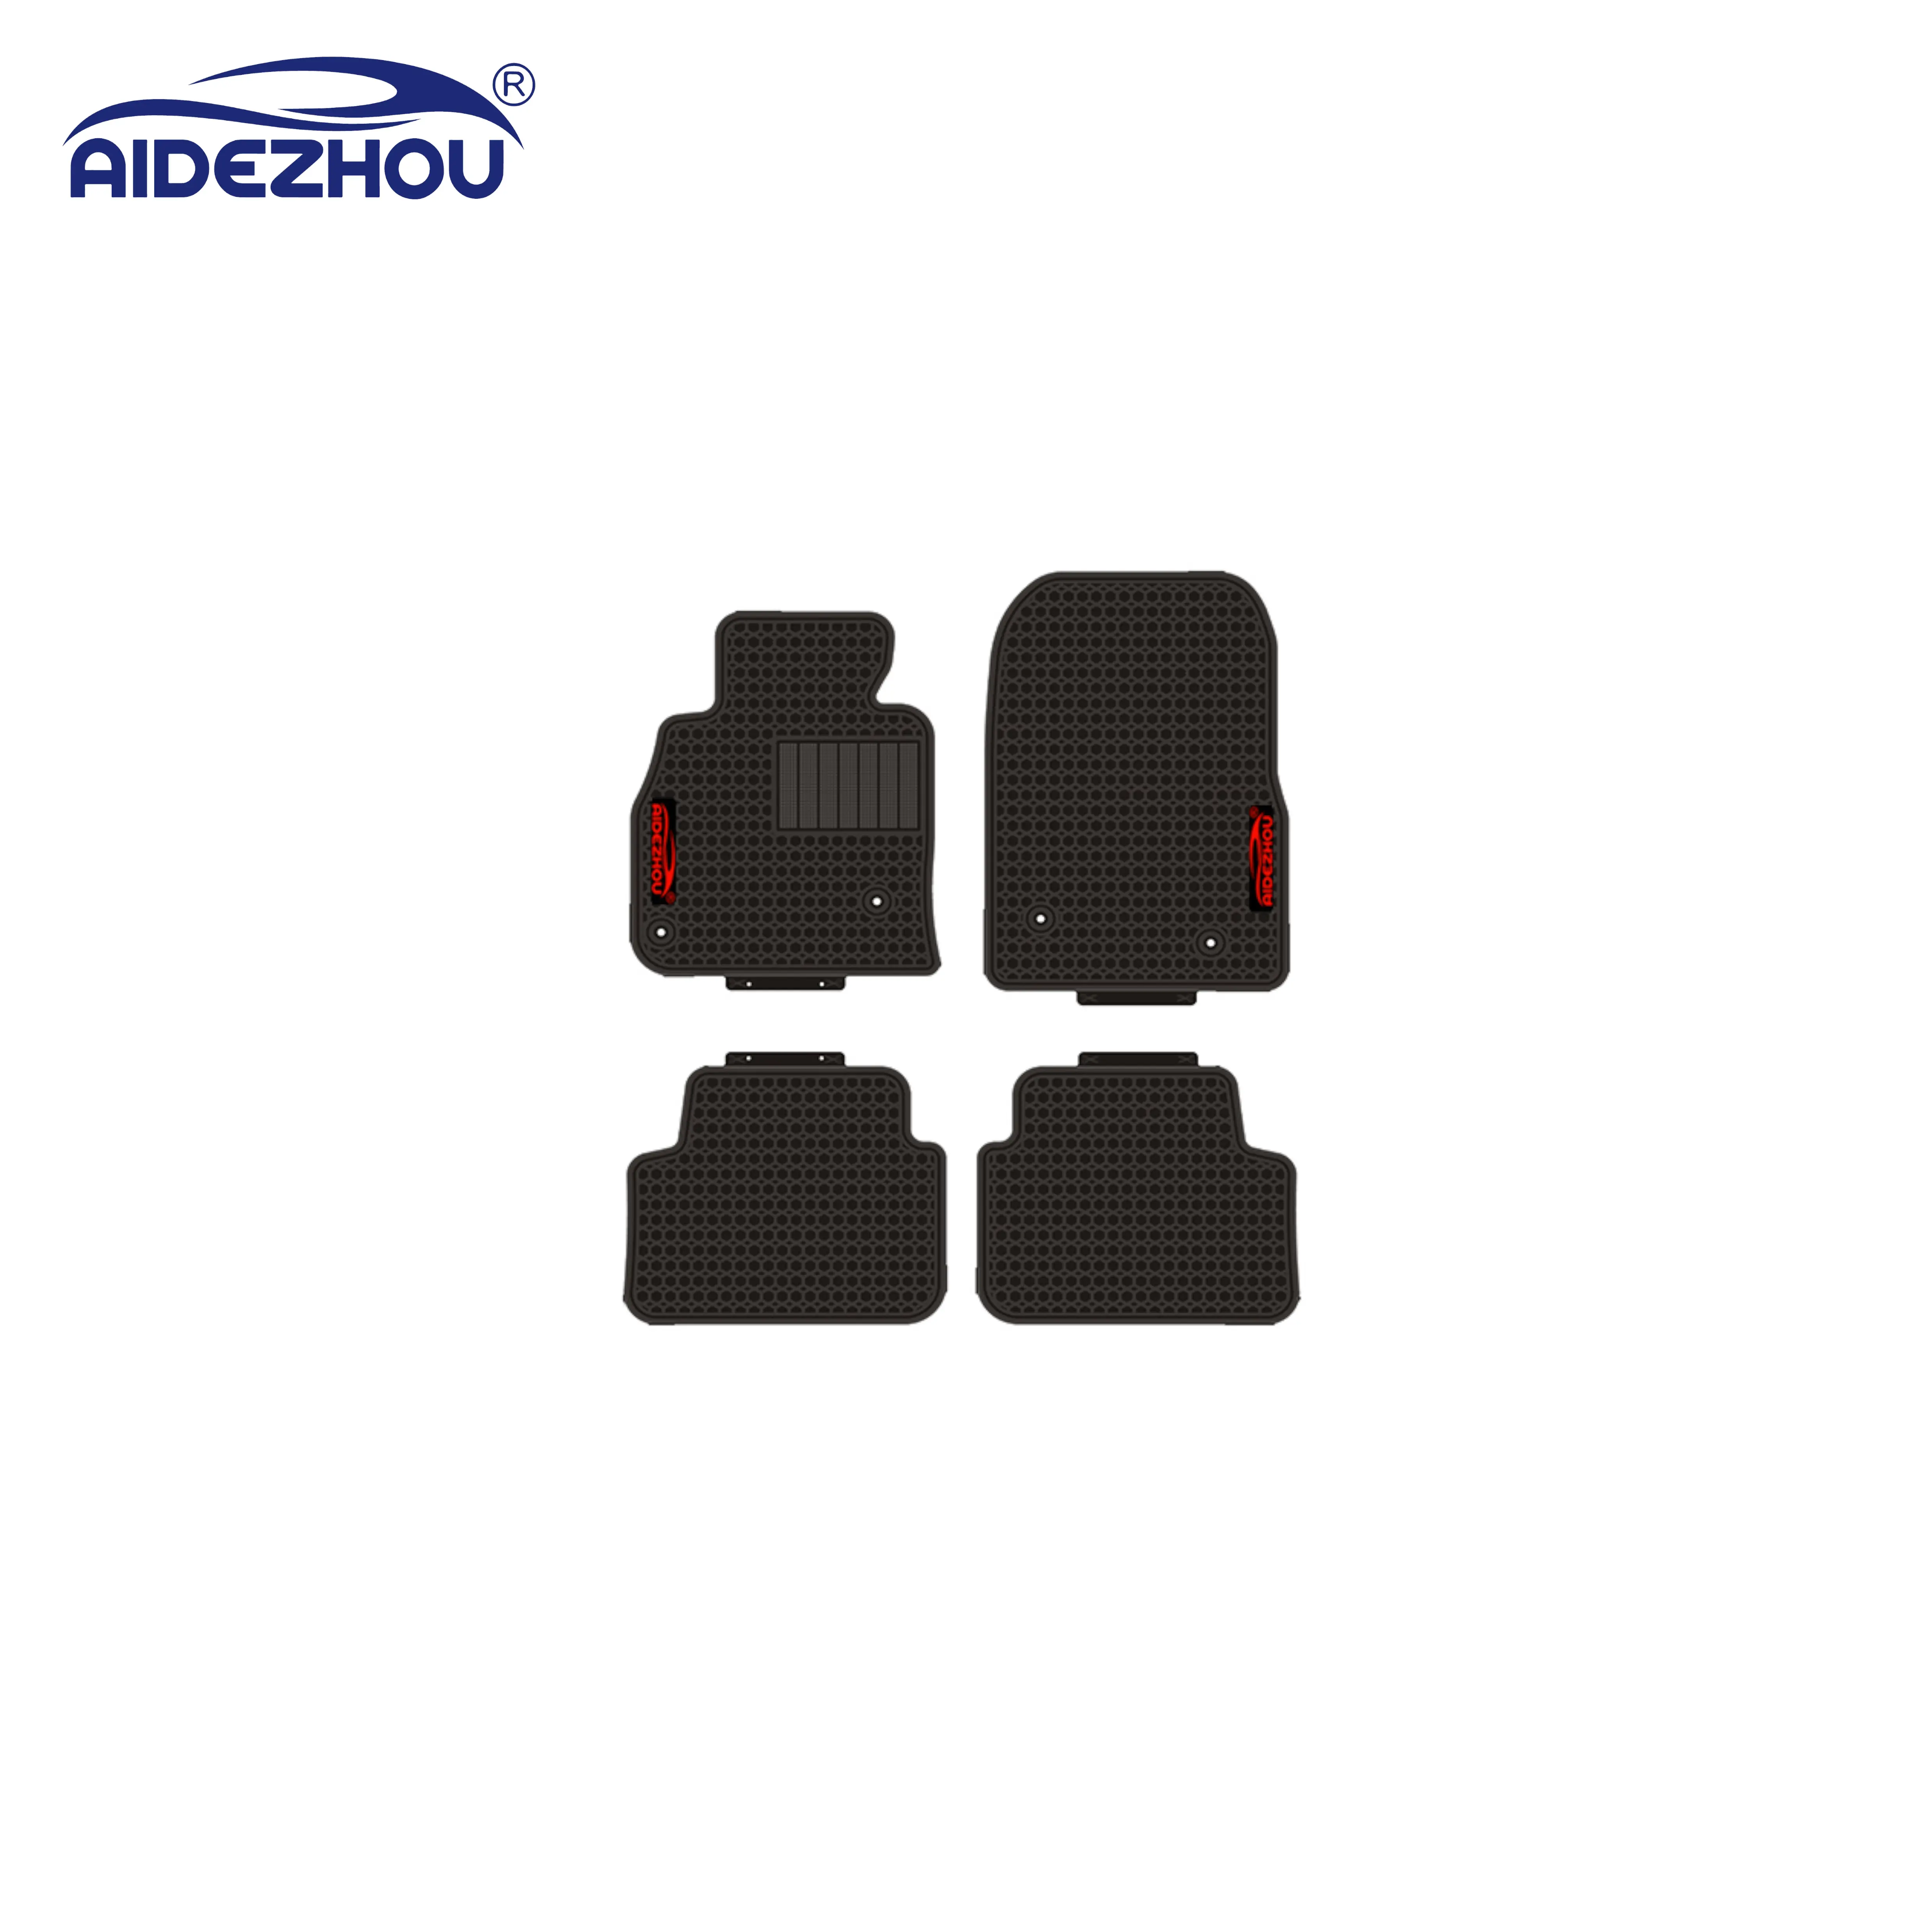 Factory Wholesale Modify Protection Decoration Product Car Floor Mats fit for Mazda 3 Skyactiv 2009 2010 2011 2012 2013